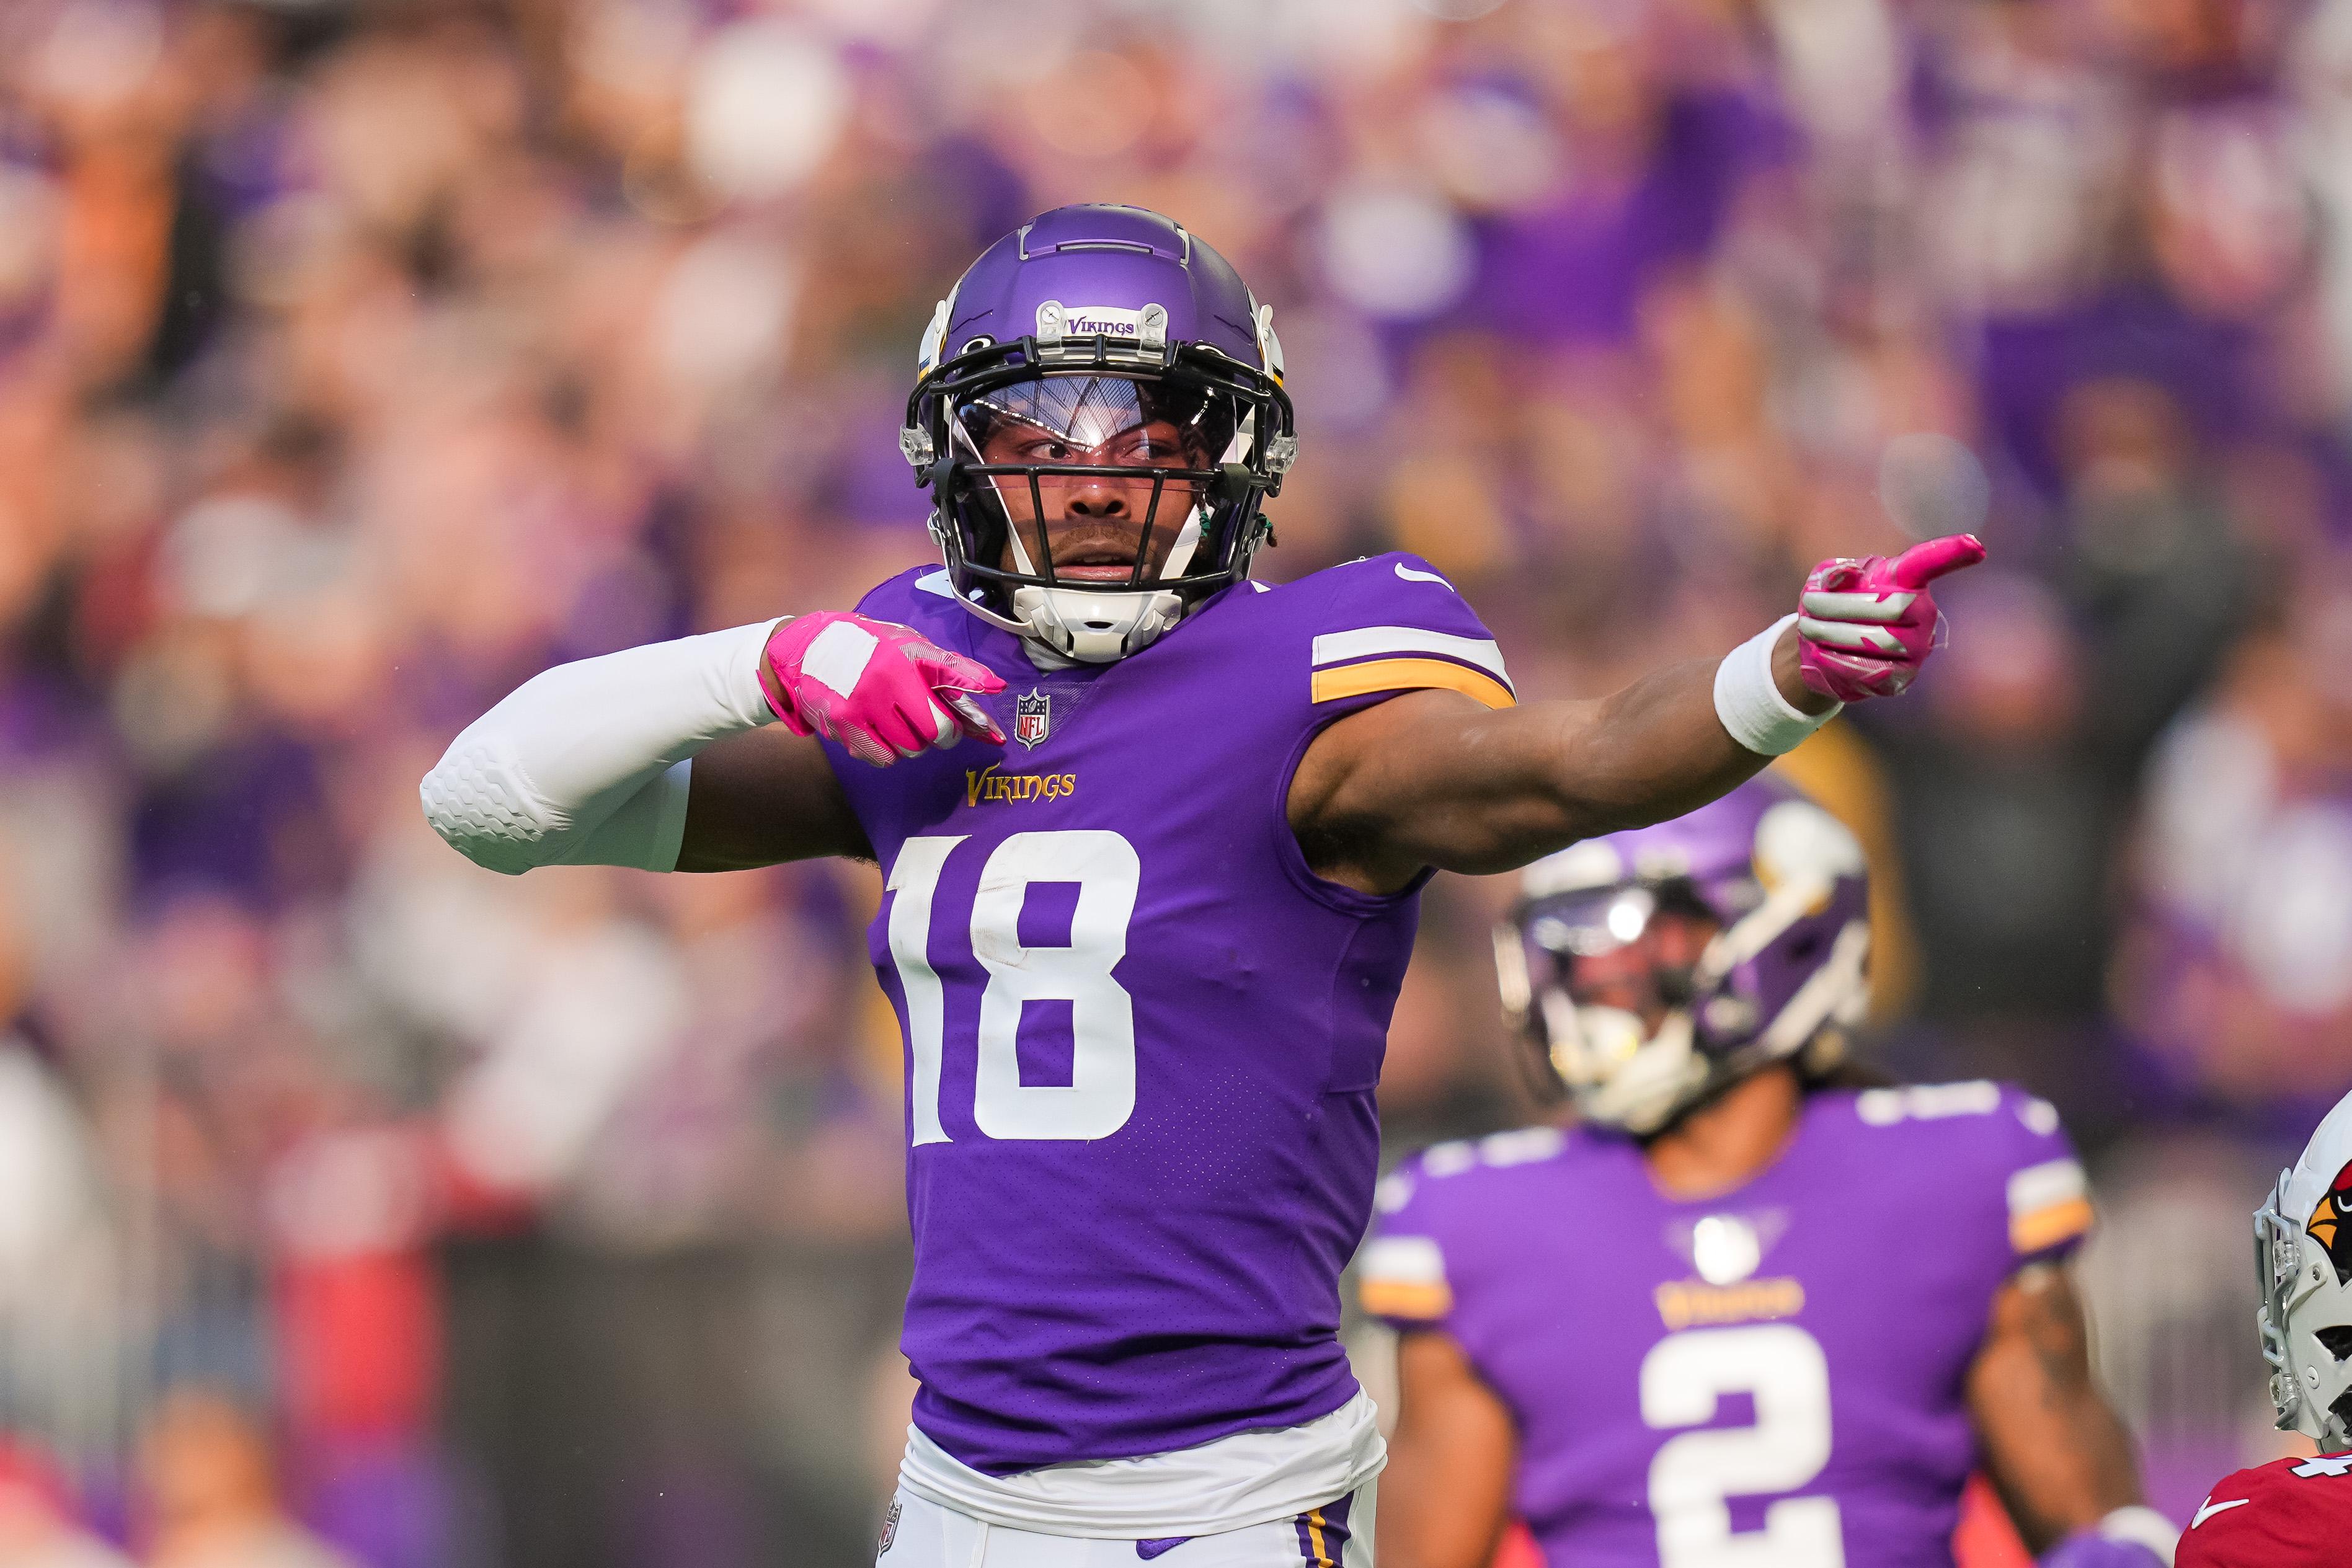 4 Players to Target This Week in NFL Daily Fantasy for Week 10